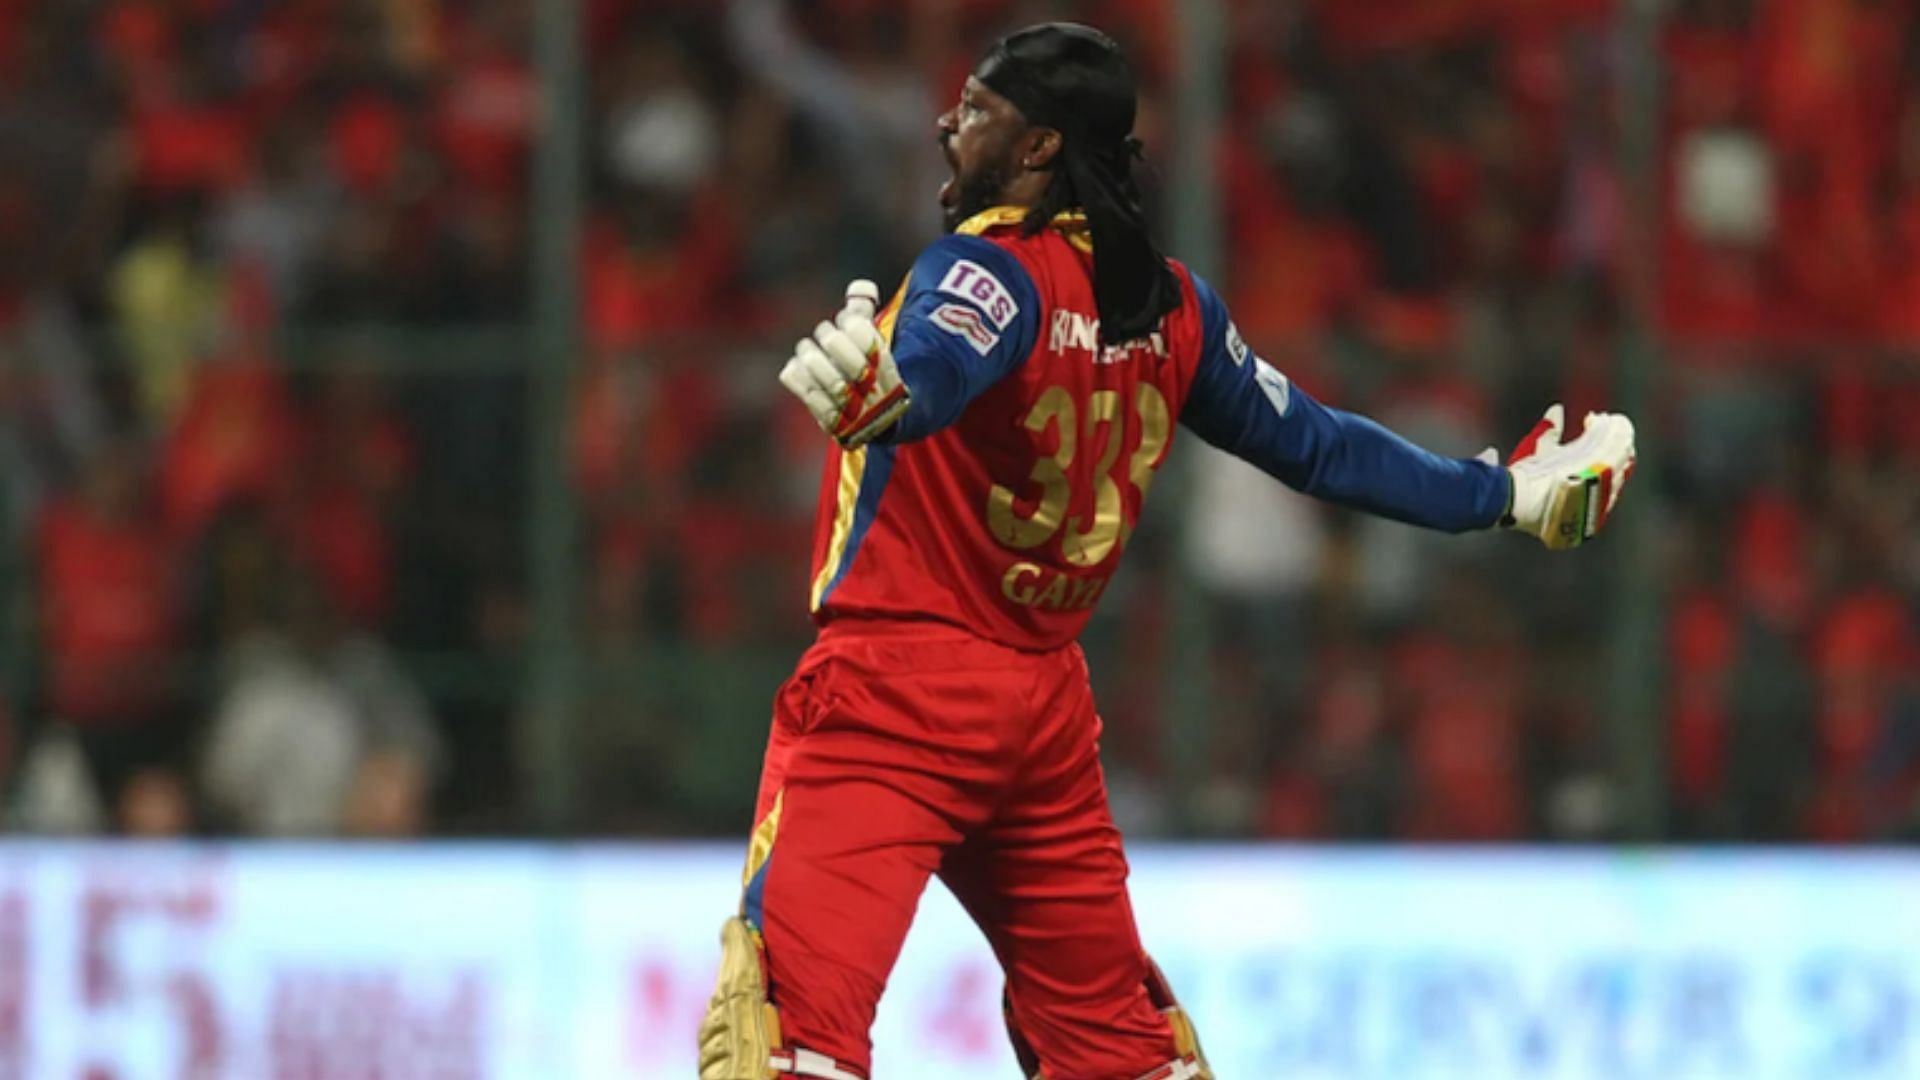 Gayle celebrates after scoring a century against Punjab in 2015.